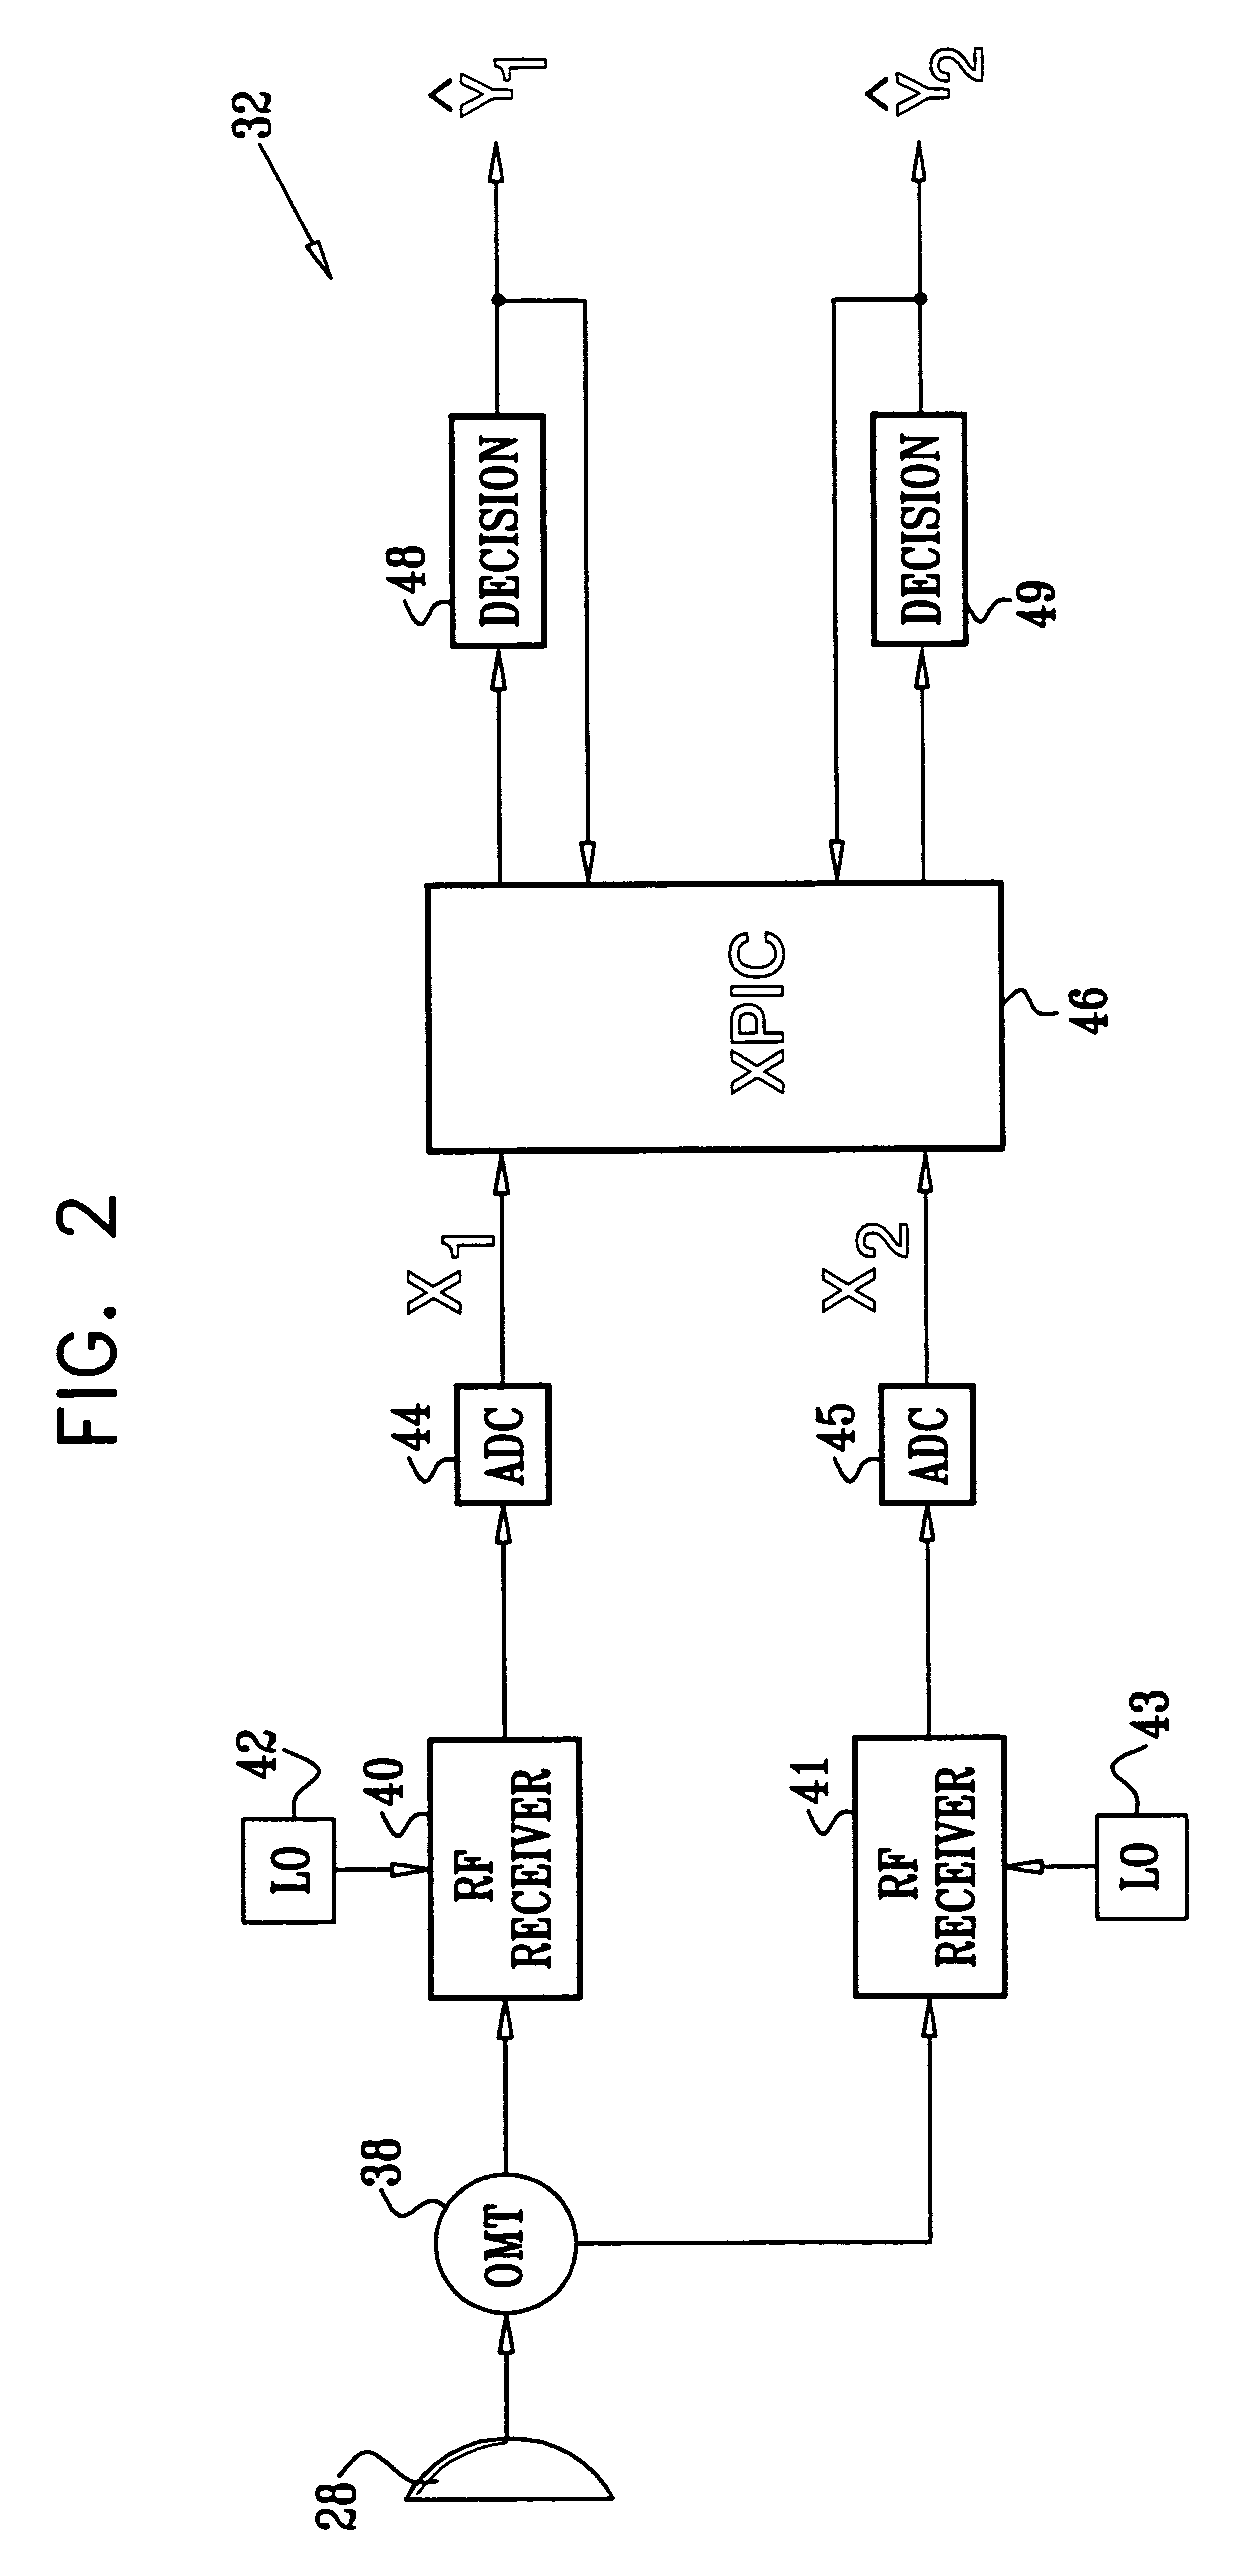 Interference canceller with fast phase adaptation